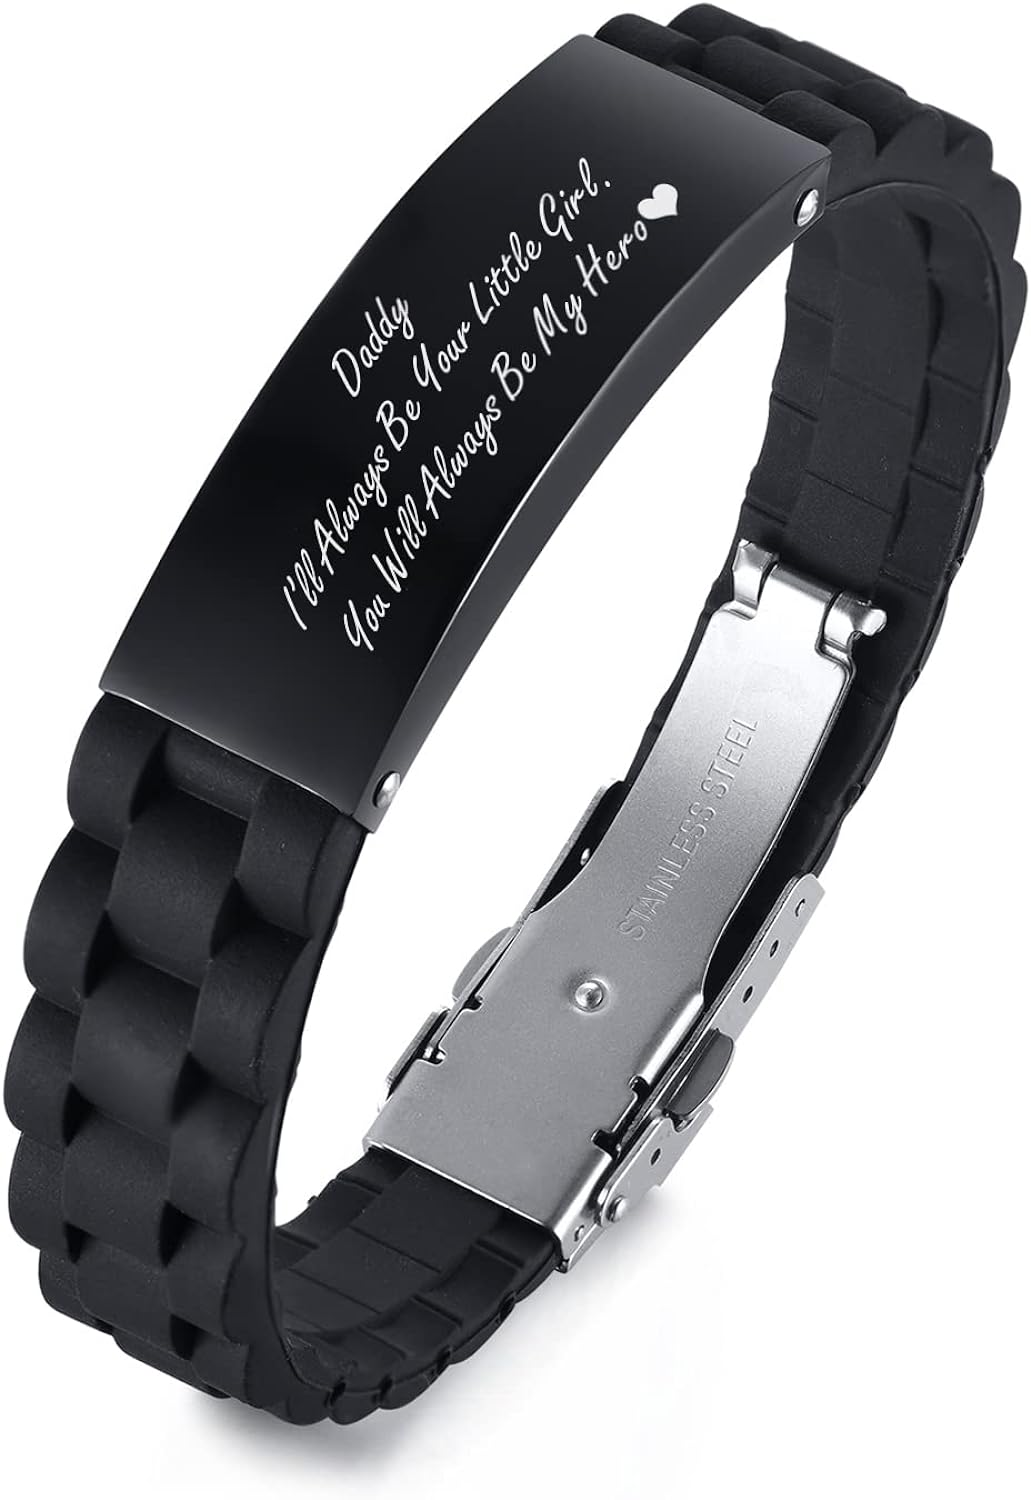 Men's Bracelet Personalised Daddy Gifts - Black Stainless Steel ID Silicone Bracelet to My Dad Quote Engraved DAD Jewellery for Daddy Father from Son Daughter, Gift for Father's Day Birthday Christmas